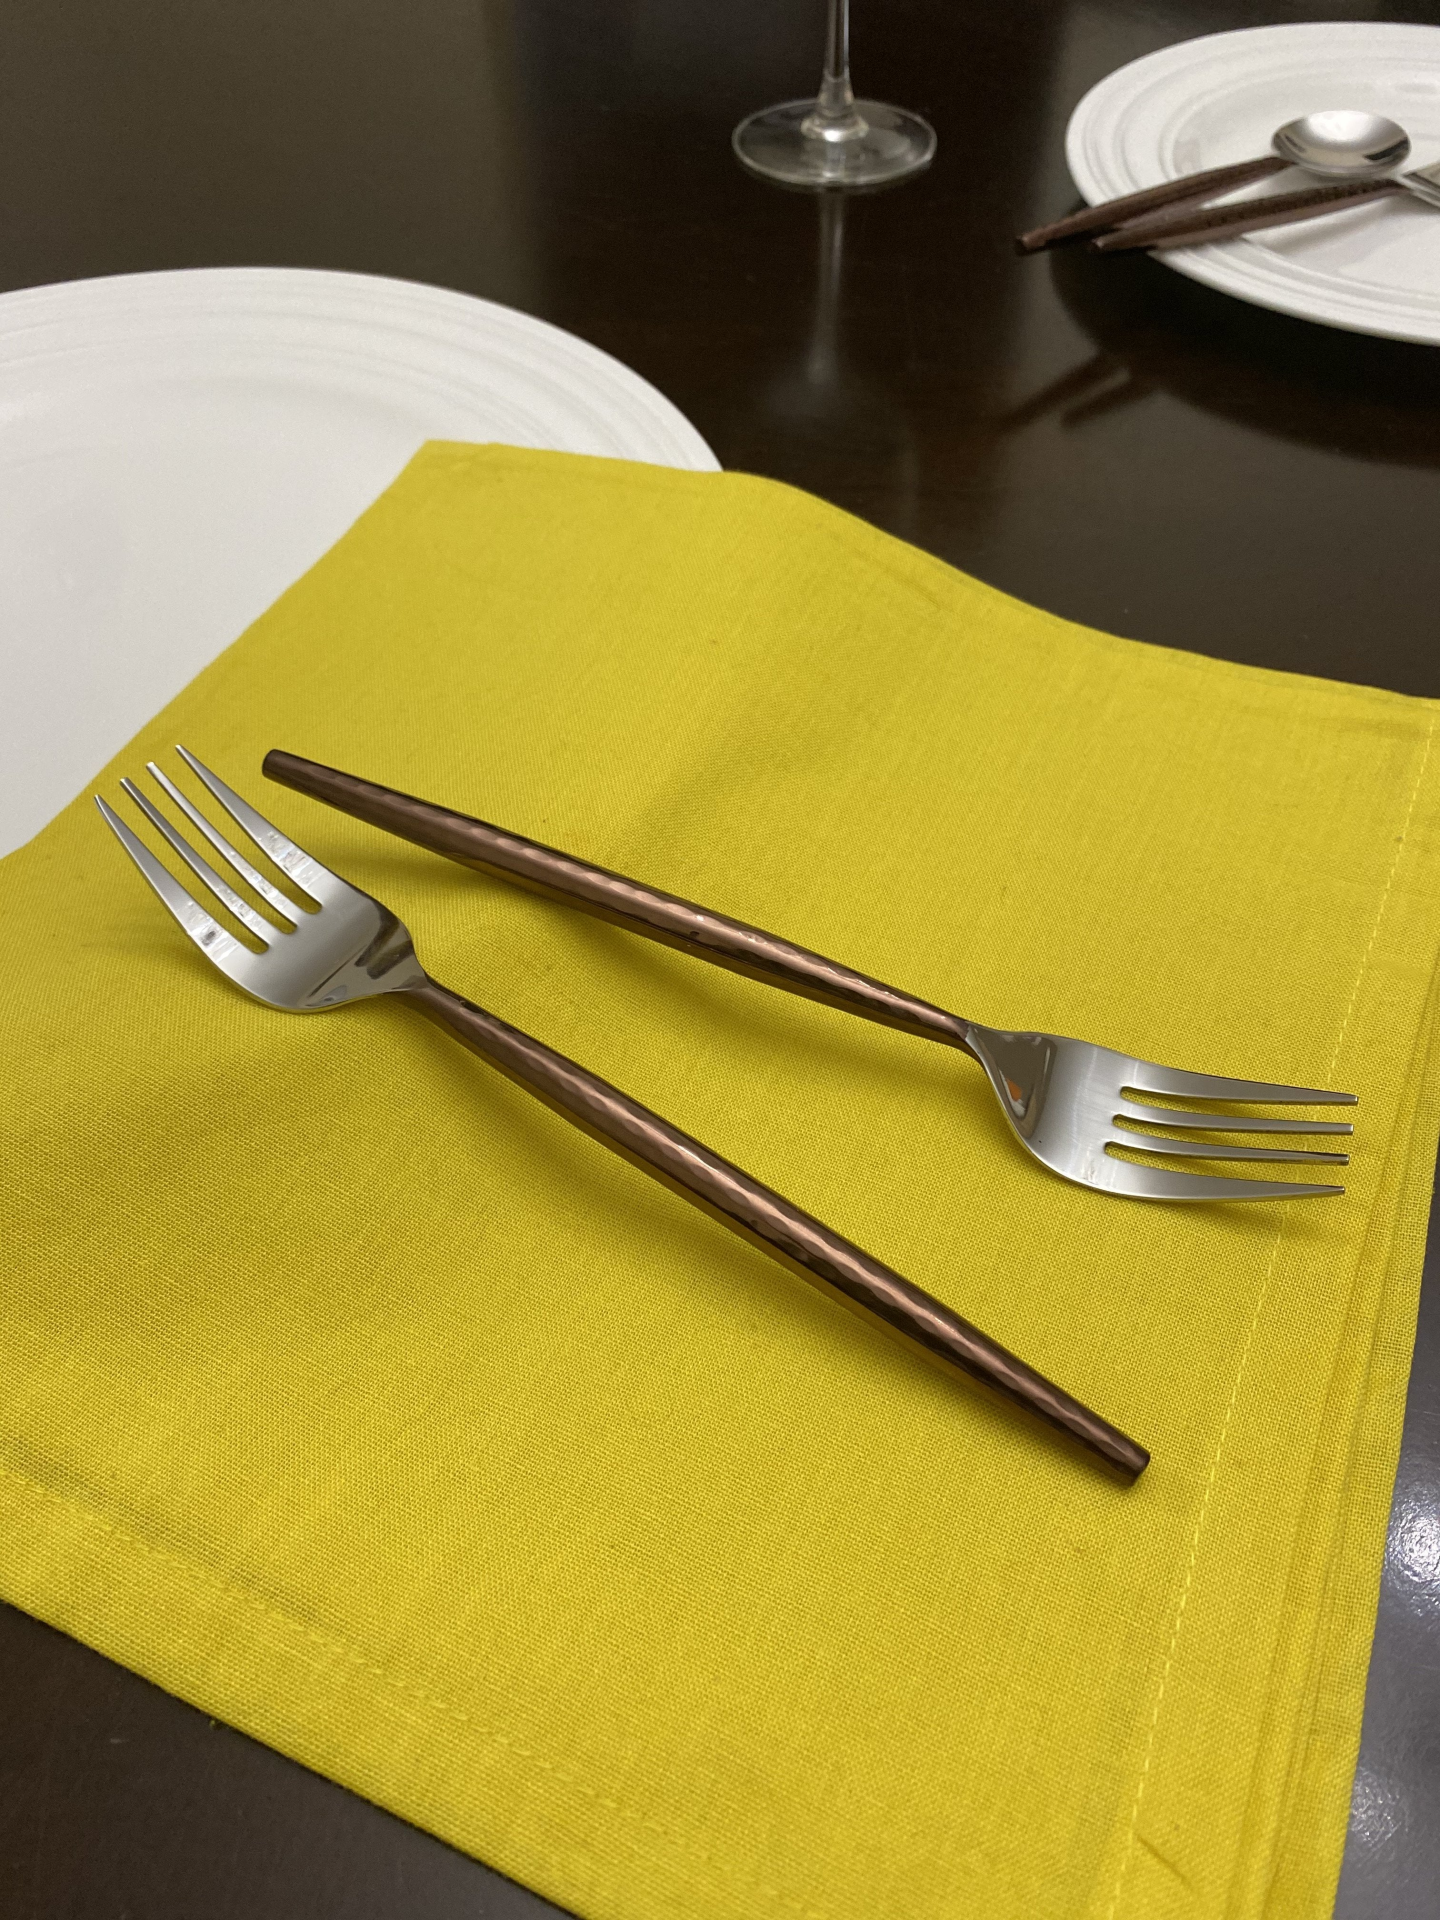 Stainless Steel Dinner Forks Set of 6 Pieces-Brown